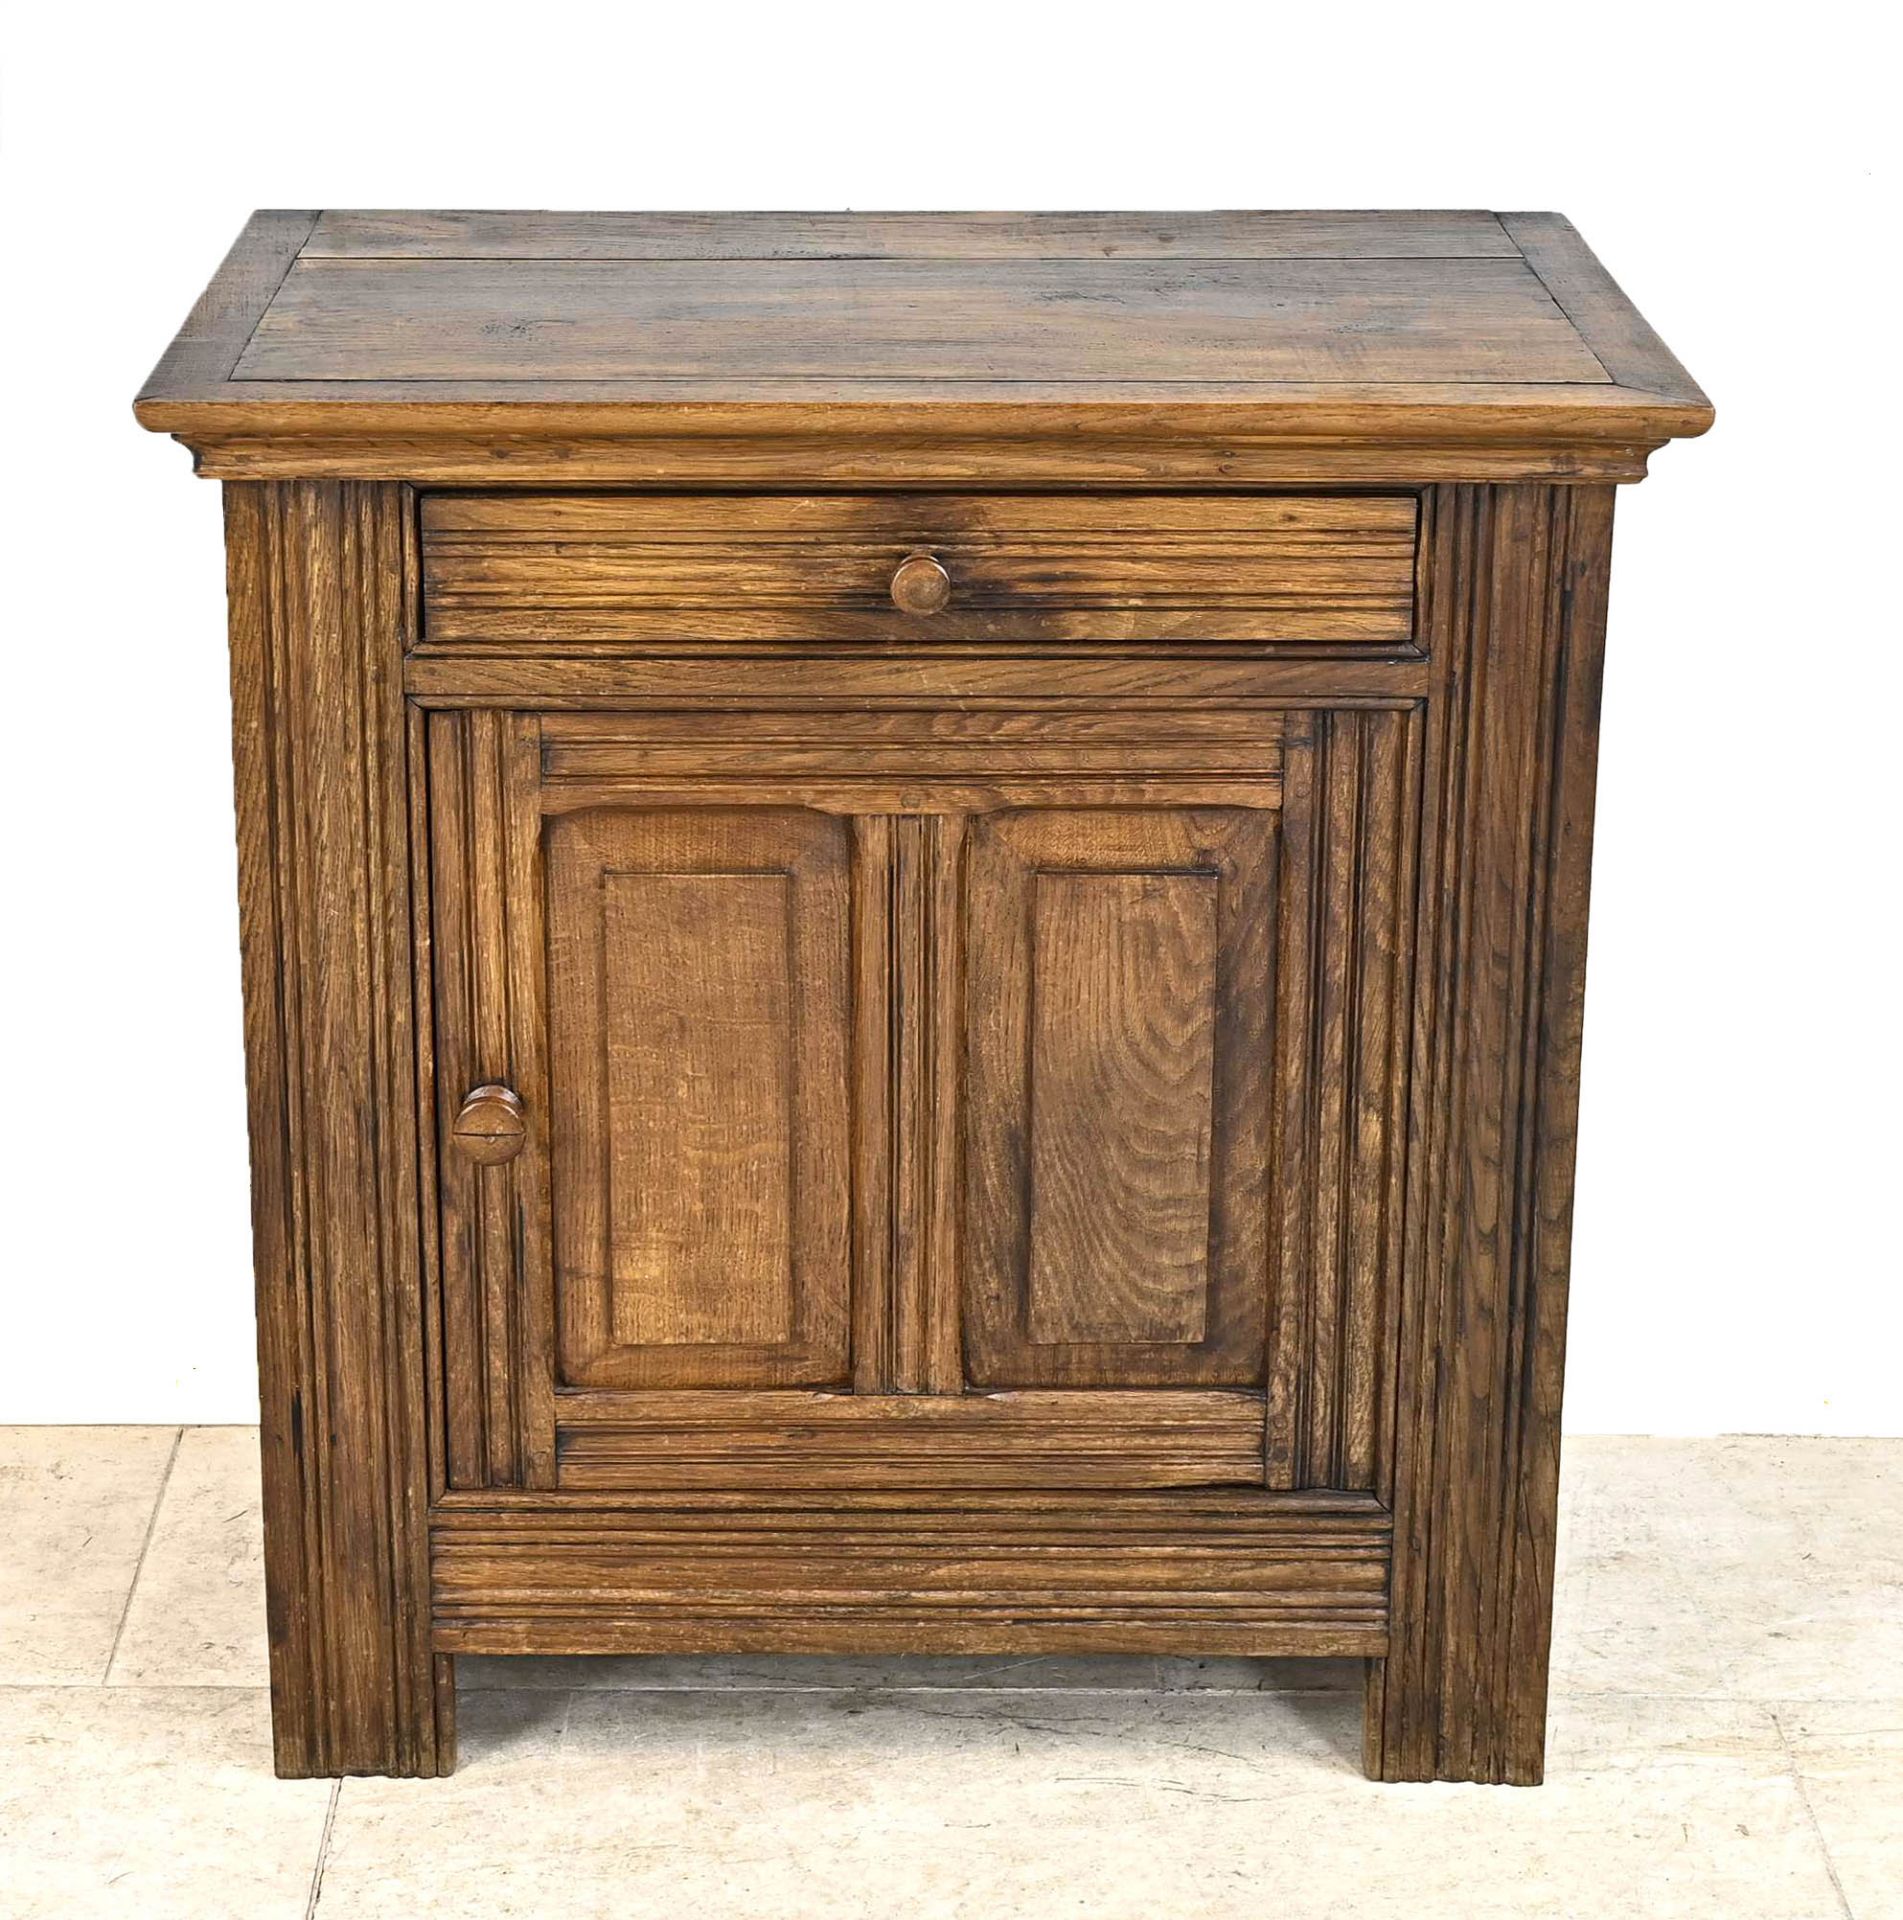 Half cupboard, early 20th century, solid oak, 1-door body with drawer, 82 x 78 x 43 cm - The